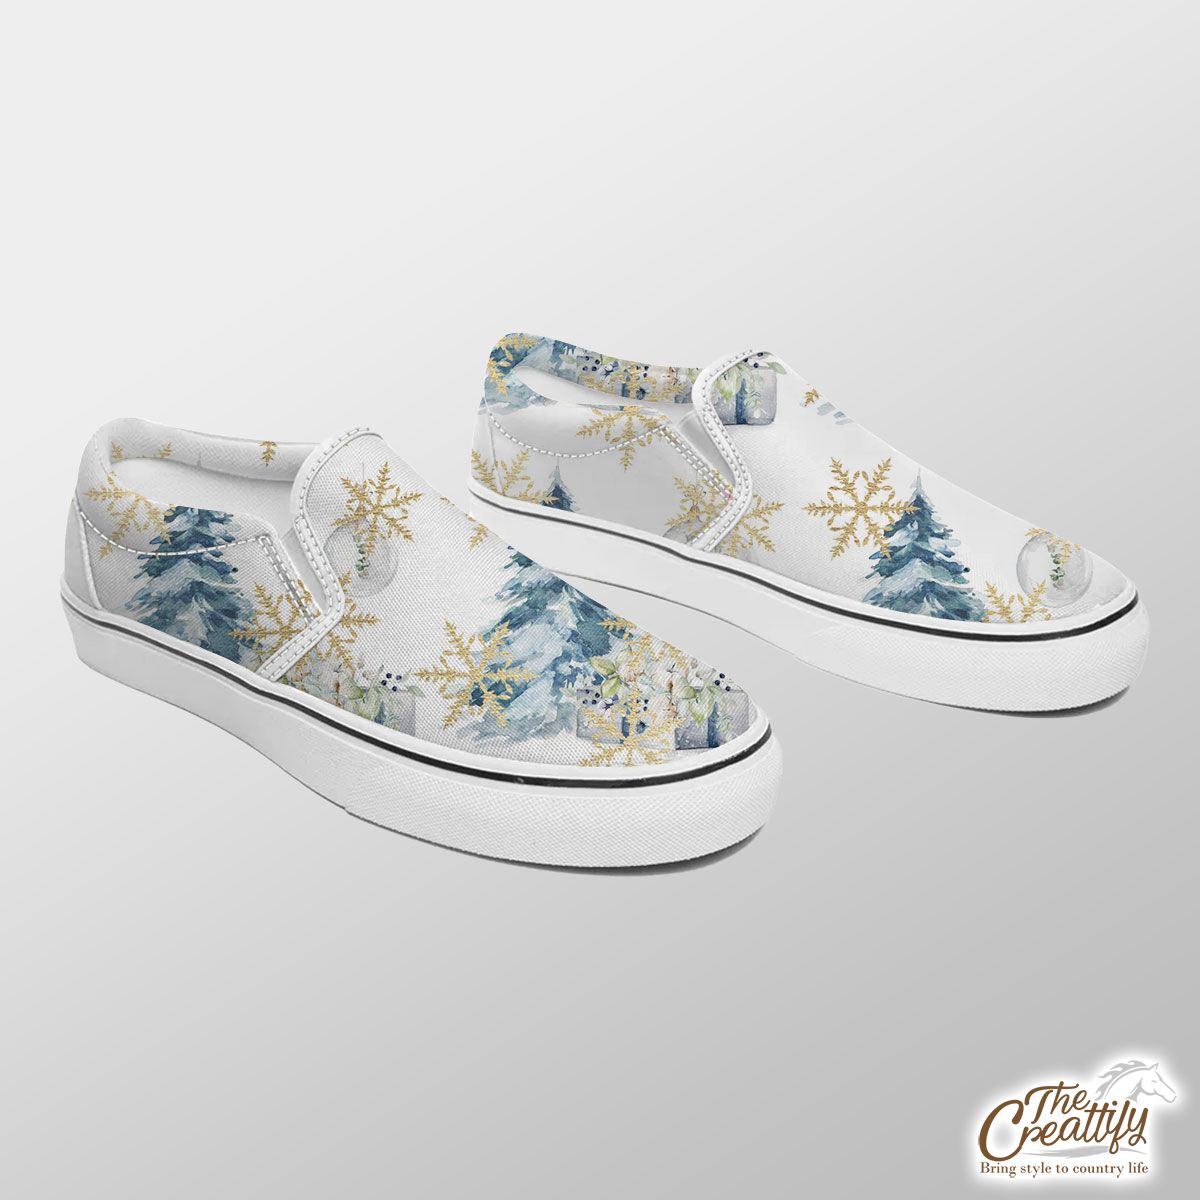 Chistmas Gifts, Gold Snowflake Clipart, Pine Tree And Chistmas Balls Seamless White Pattern Slip On Sneakers